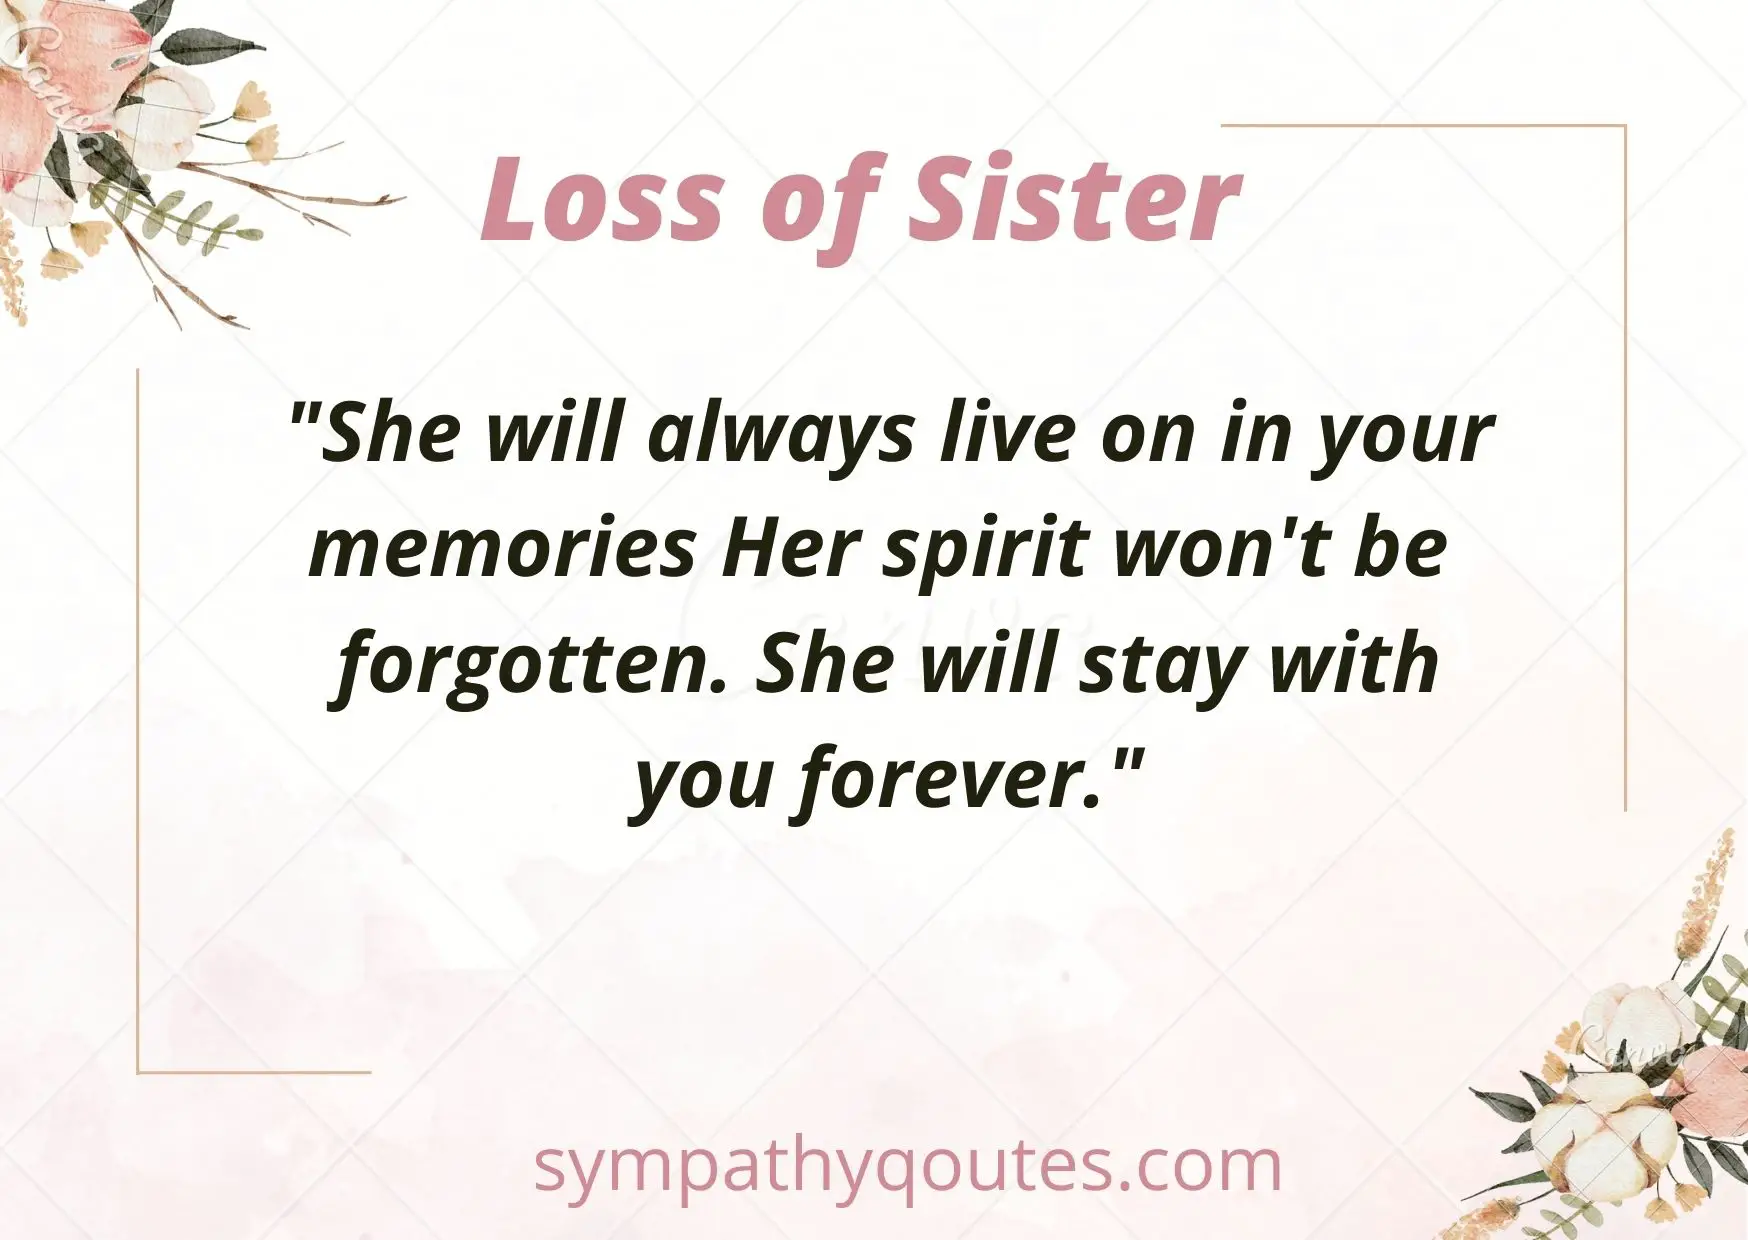 Sympathy Messages for Loss of Sister